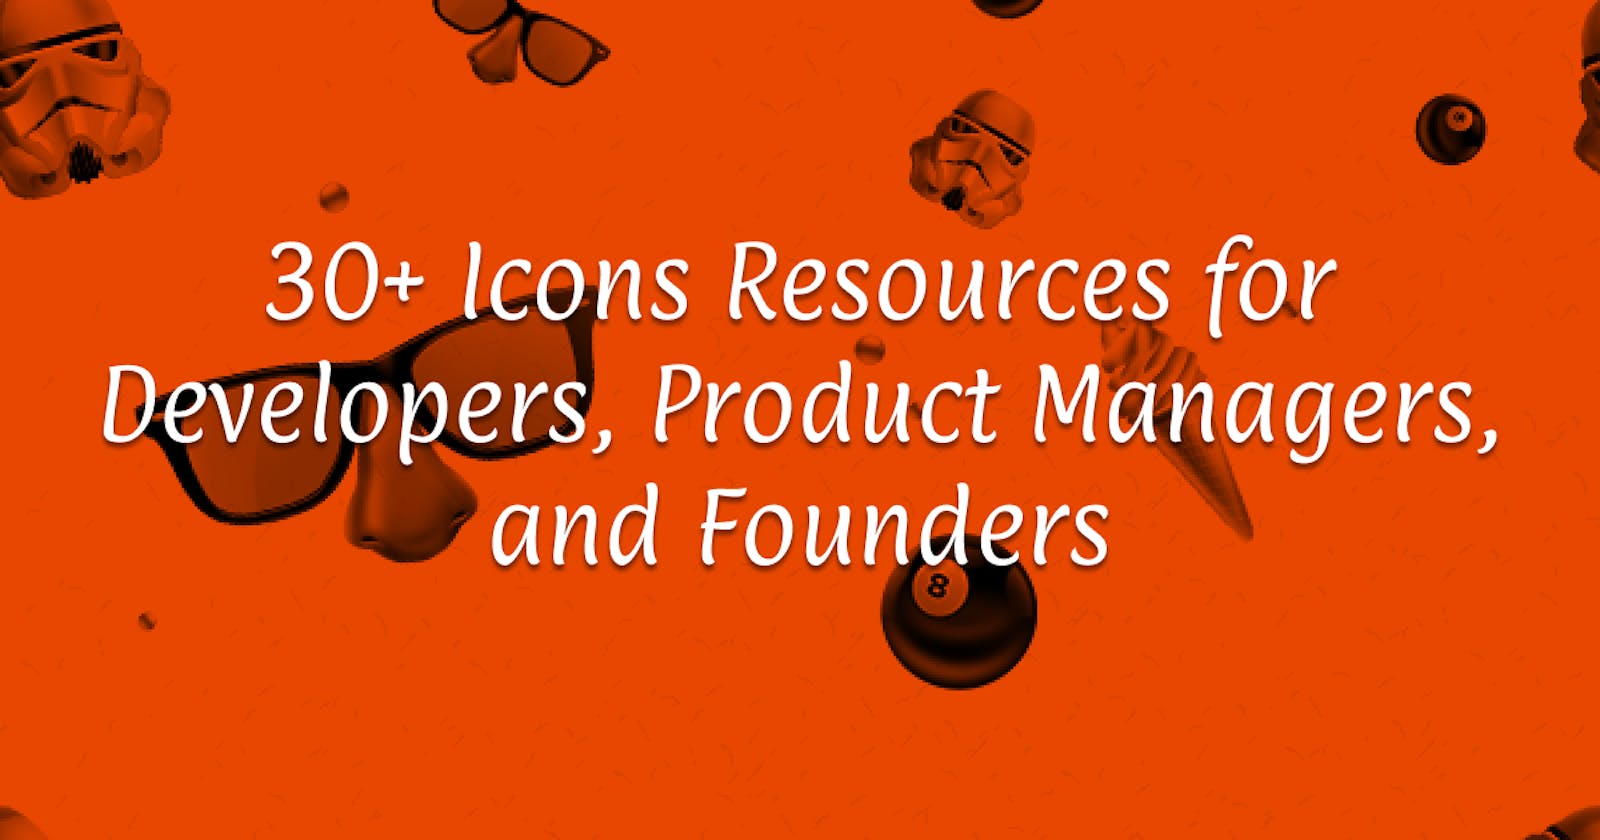 30+ Icons Resources for Developers, Product Managers, and Founders